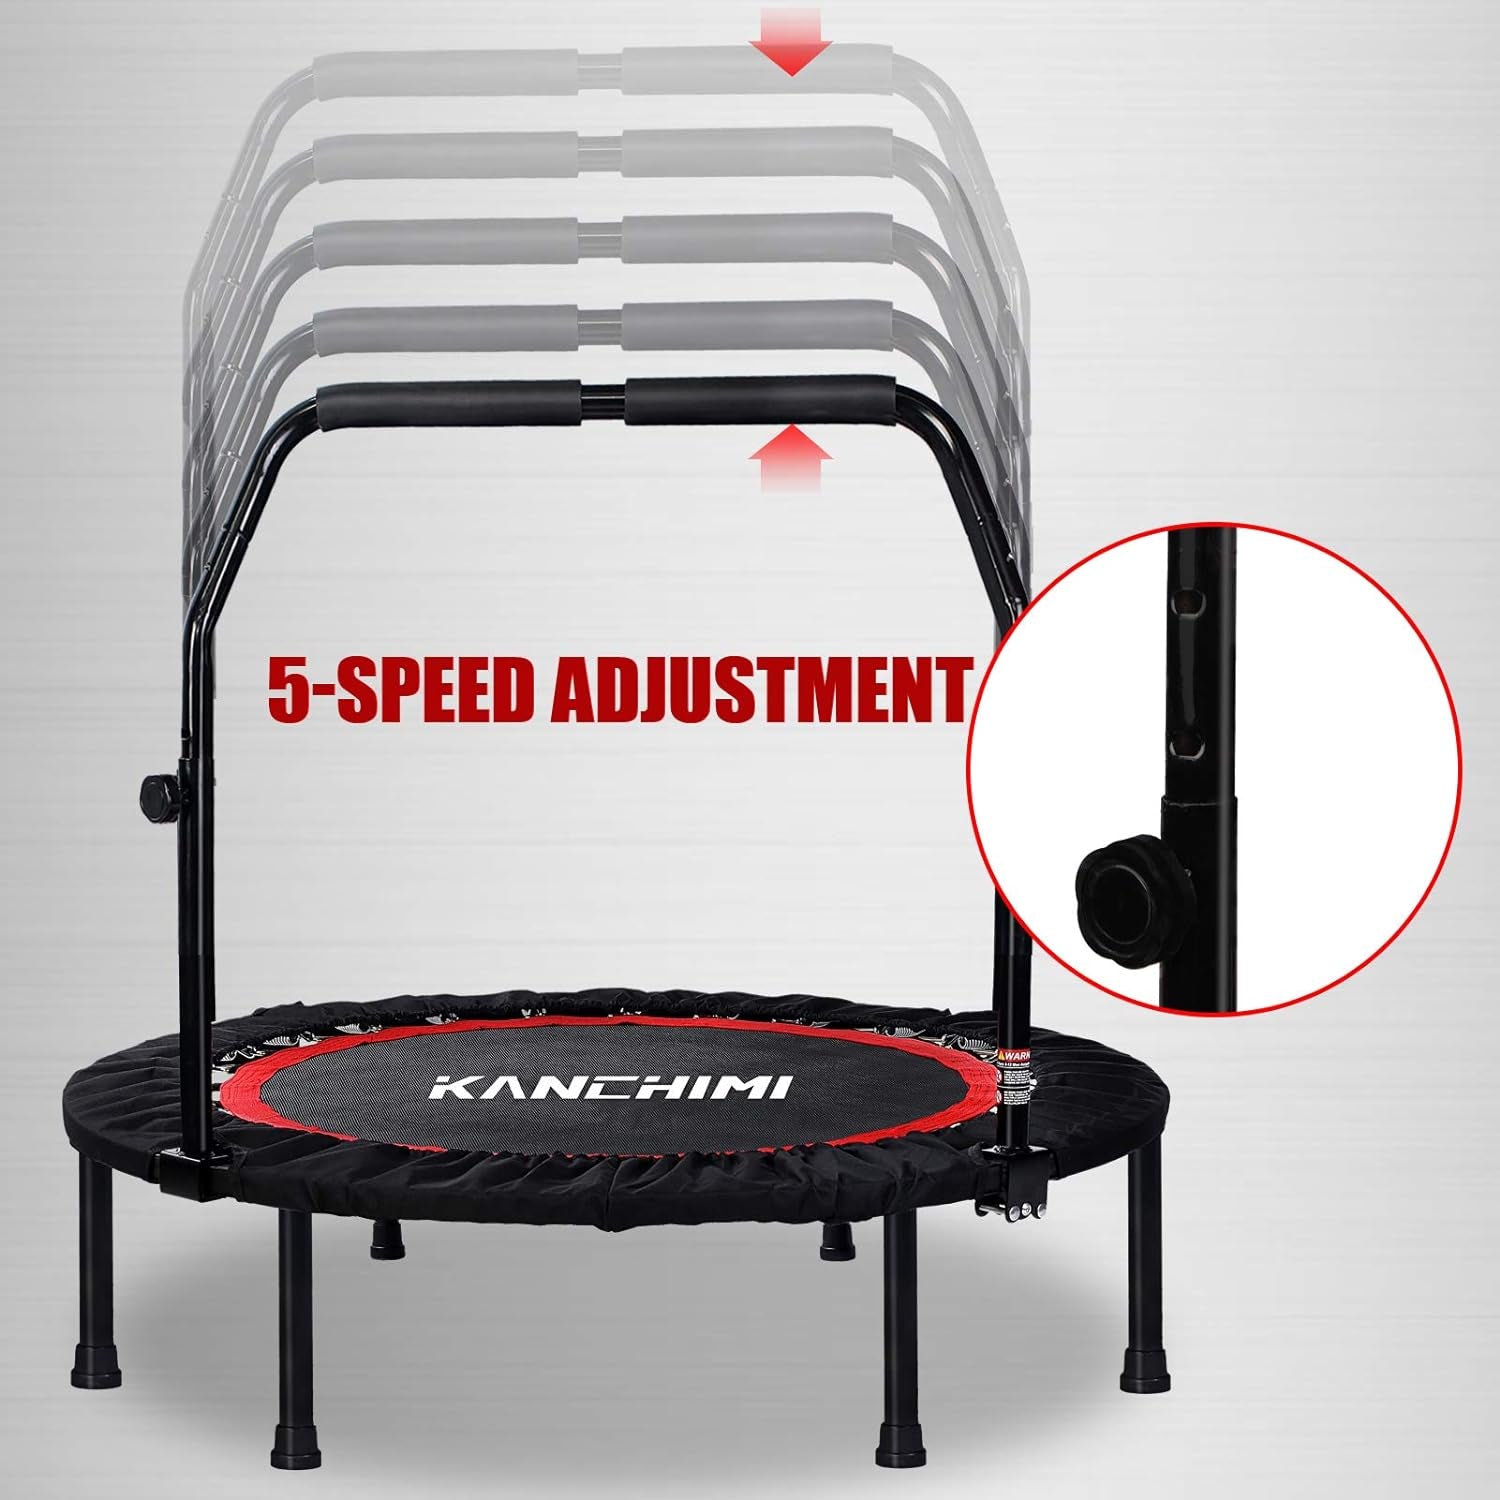 40" Folding Mini Fitness Indoor Exercise Workout Rebounder Trampoline with Handle, Max Load 330Lbs